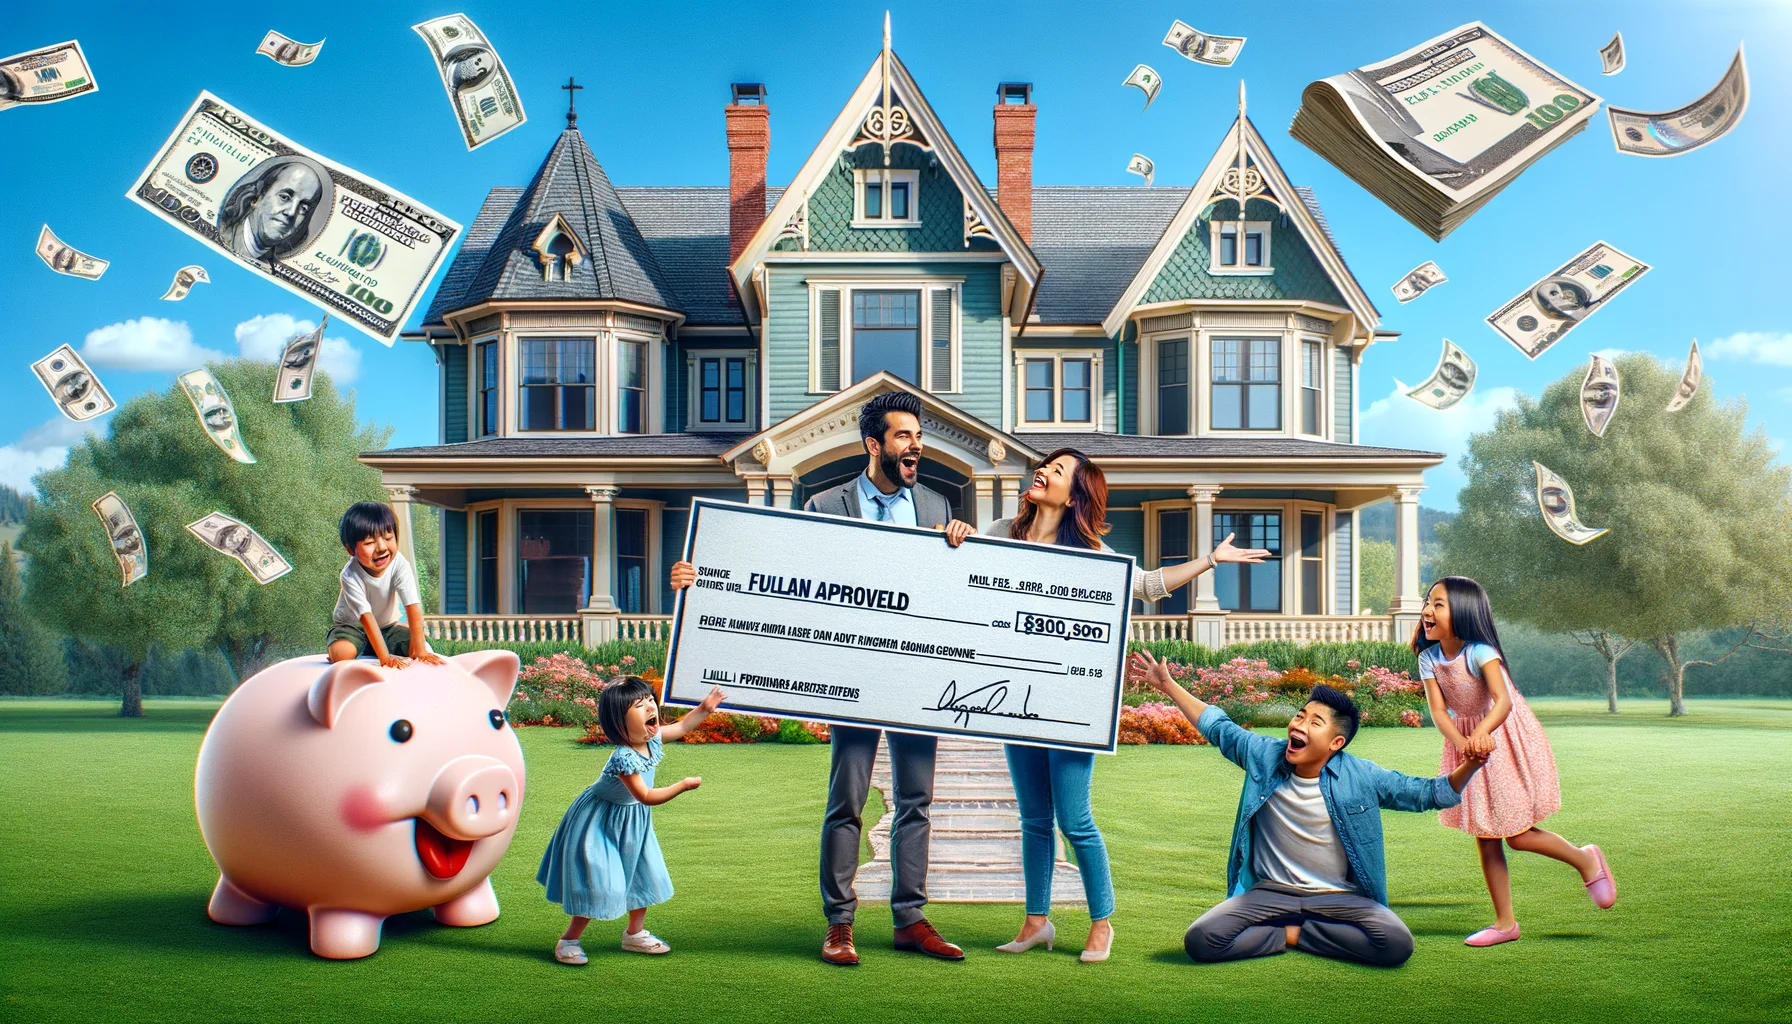 Imagine an idyllic setting showcasing the most ideal home financing scenario. In the foreground, on a bright sunny day, a jubilant East Asian man and a Hispanic woman hold up a giant, oversized check, marked 'Full Loan Approval'. Their children, a gregarious Caucasian boy and a Middle-Eastern girl, are playfully pulling each other on a lush green lawn in front of a beautiful dream Victorian-style house. All around them, humorous elements are abound - a piggy bank is raining dollar coins, a happy mortgage document is dancing, and the price tags on nearby homes are shaking in surprise.